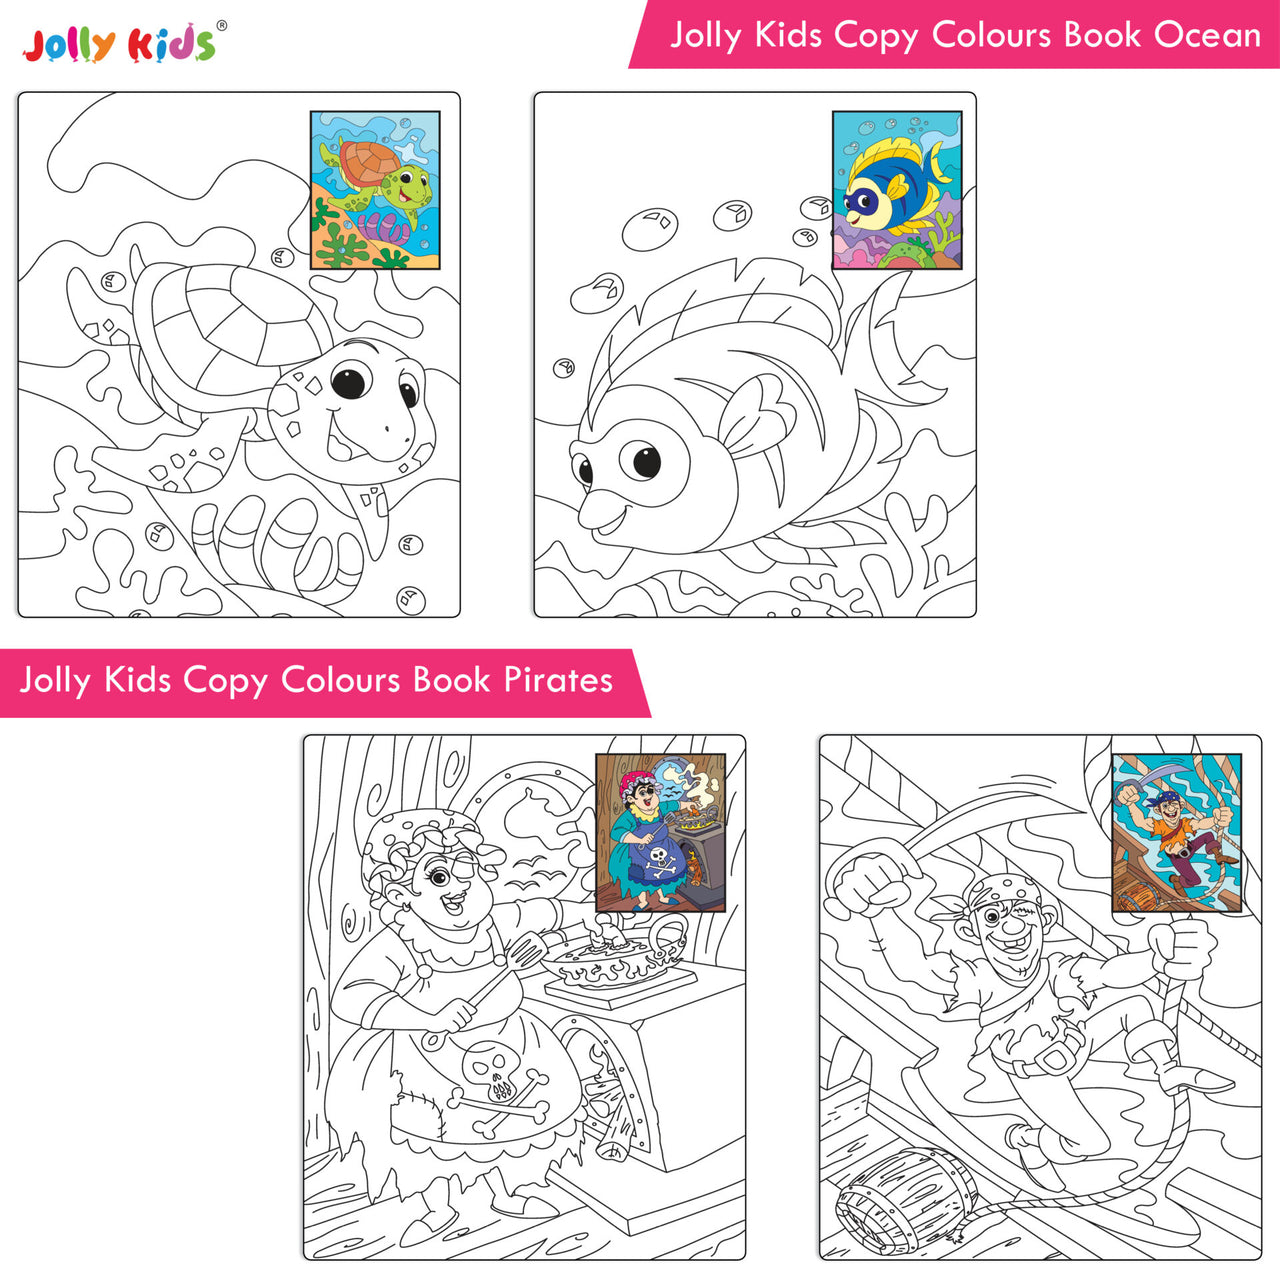 Jolly Kids Big Copy Colour Books Set of 8| Colouring Theme Animals, Flowers, Dinosaurs, Mermaid, Ocean, Pirates, Princess & Unicorn Ages 3-10 Years - Distacart